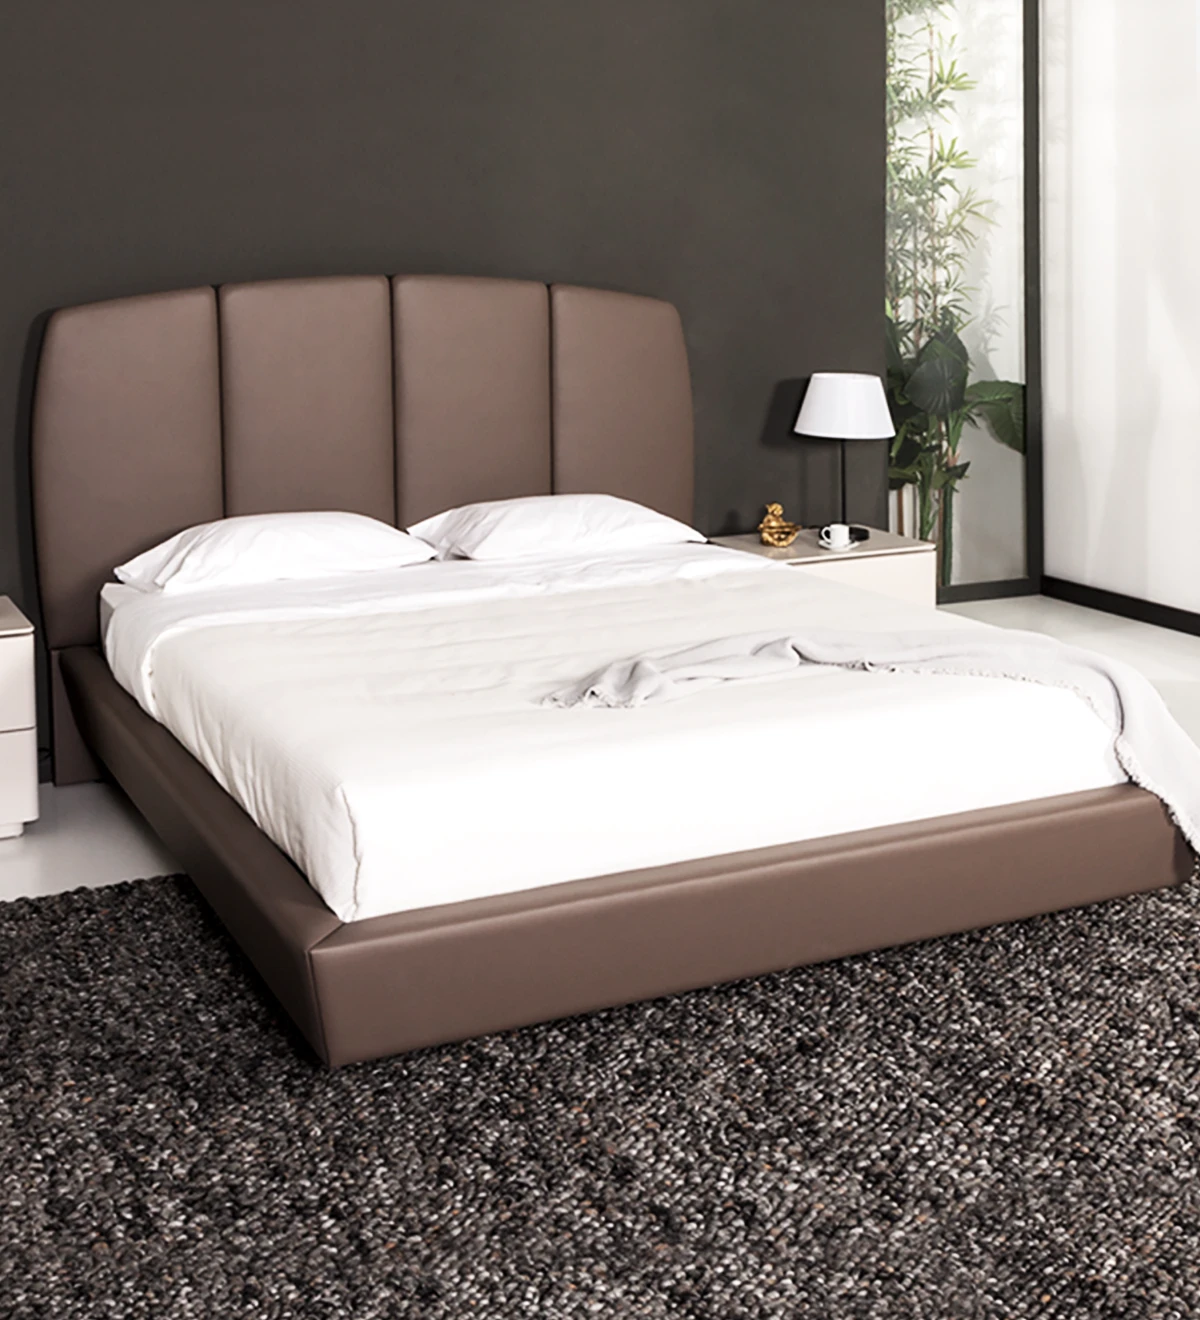 Eco-Leather upholstered double bed with hanging backboard.